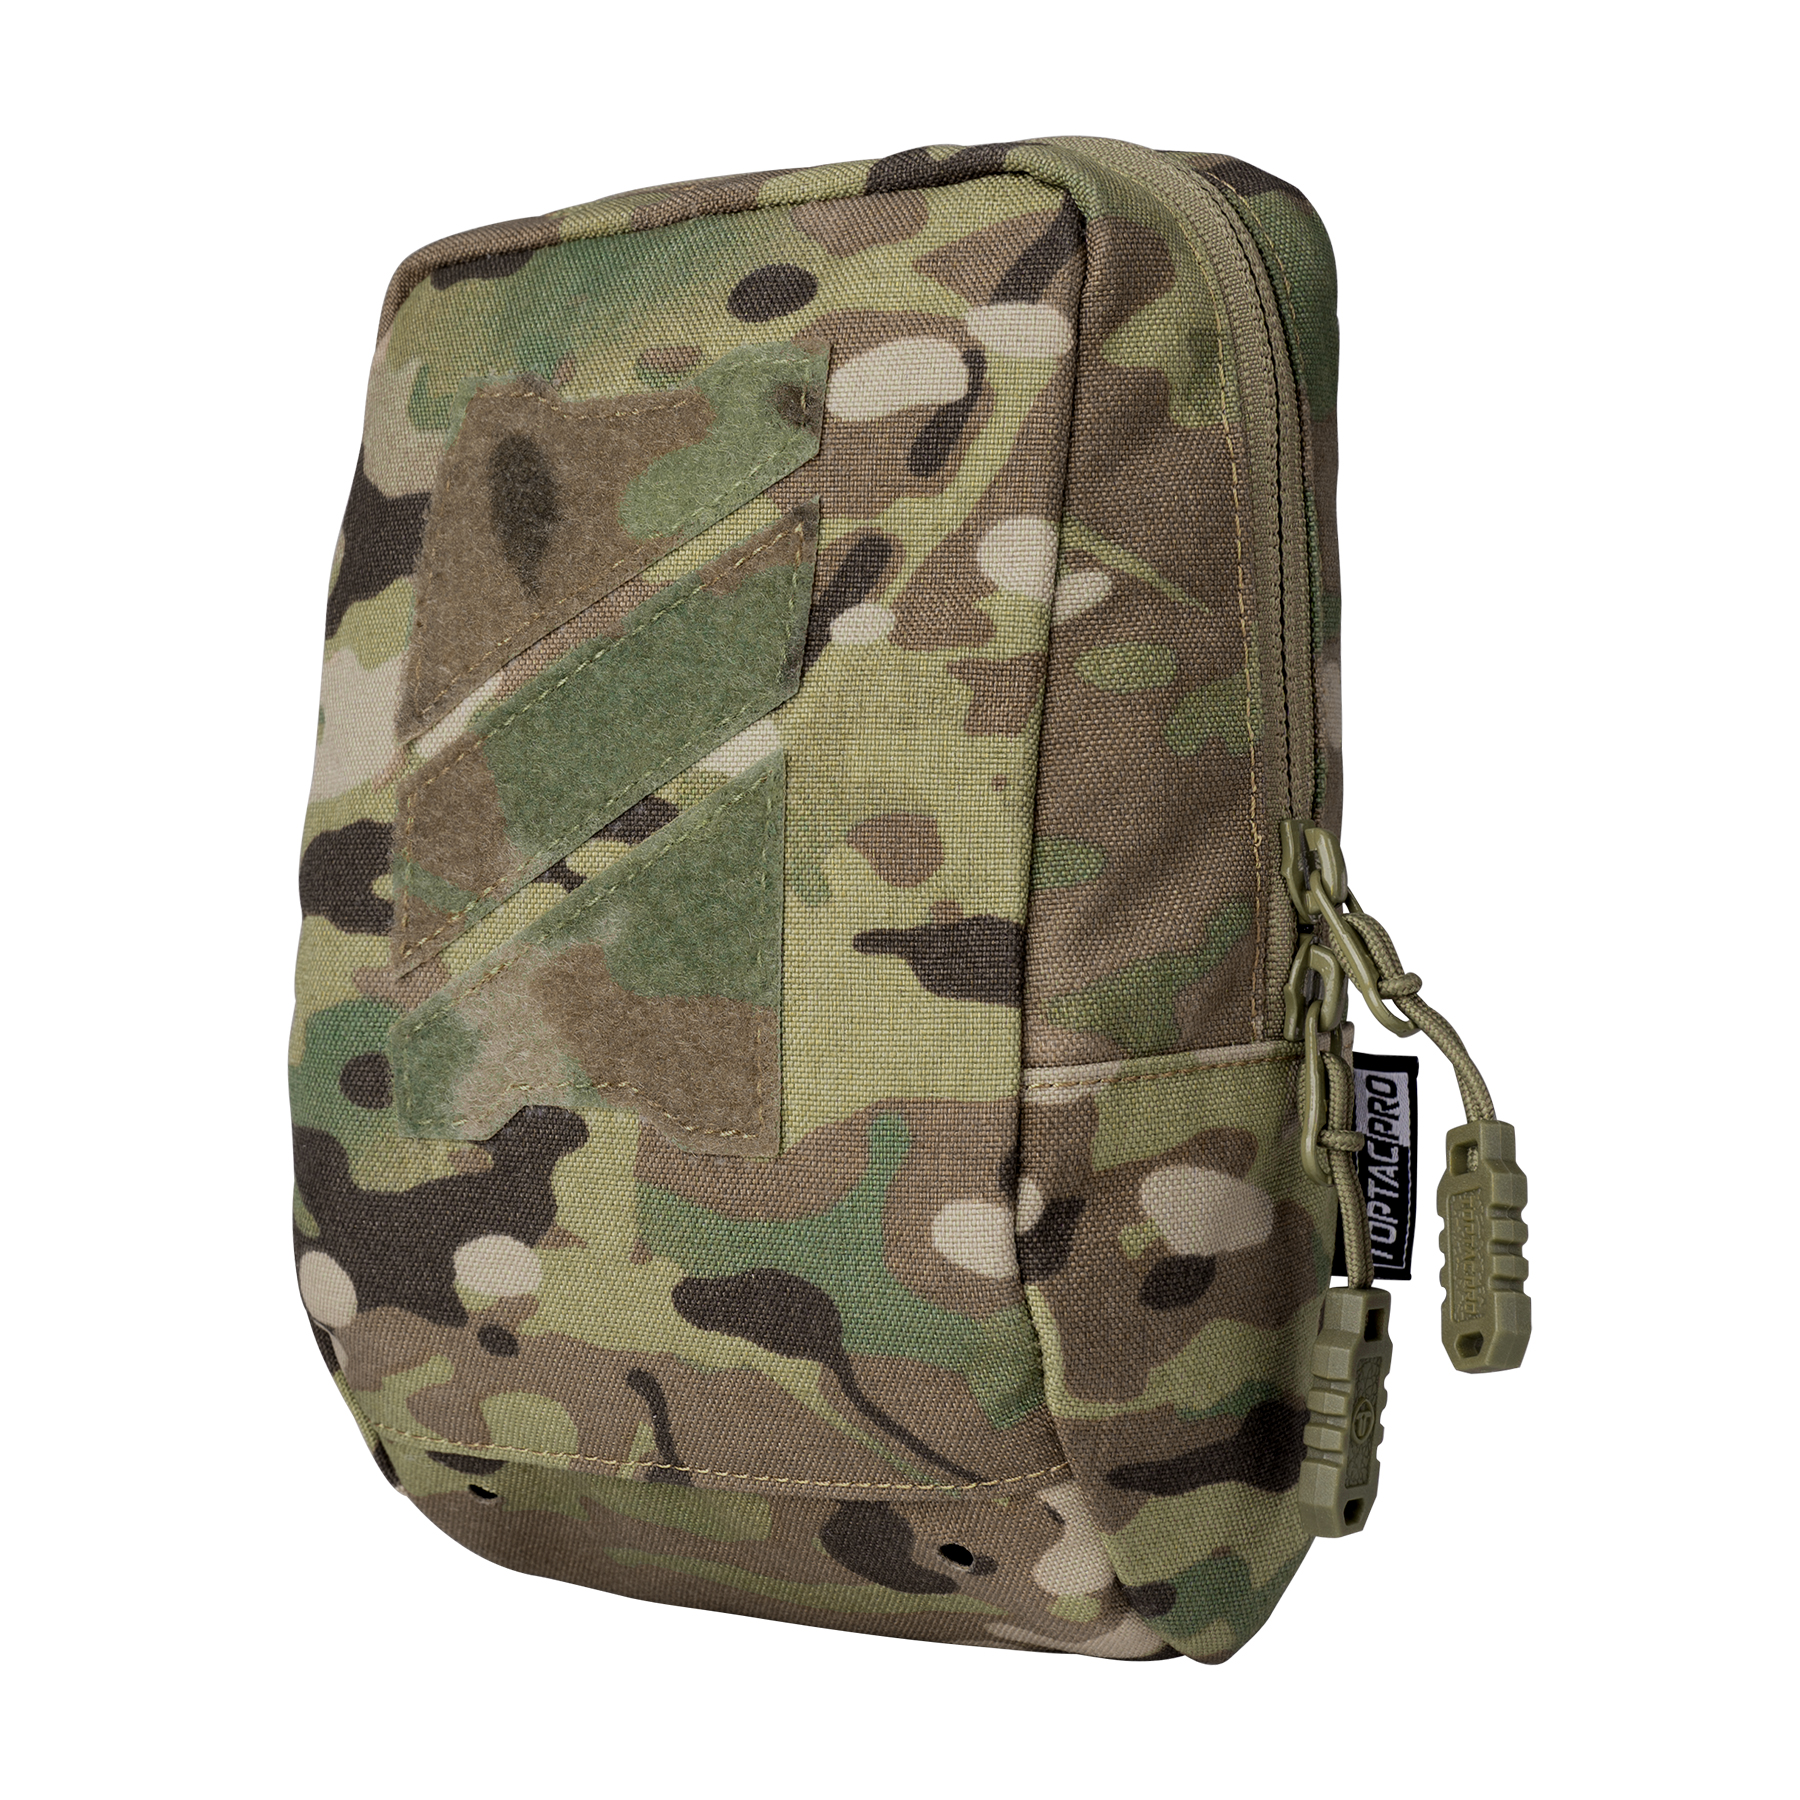 TOPTACPRO Tactical Pouch MOLLE Utility Pouch Military Duty Hunting 500D Cordura Nylon 8518